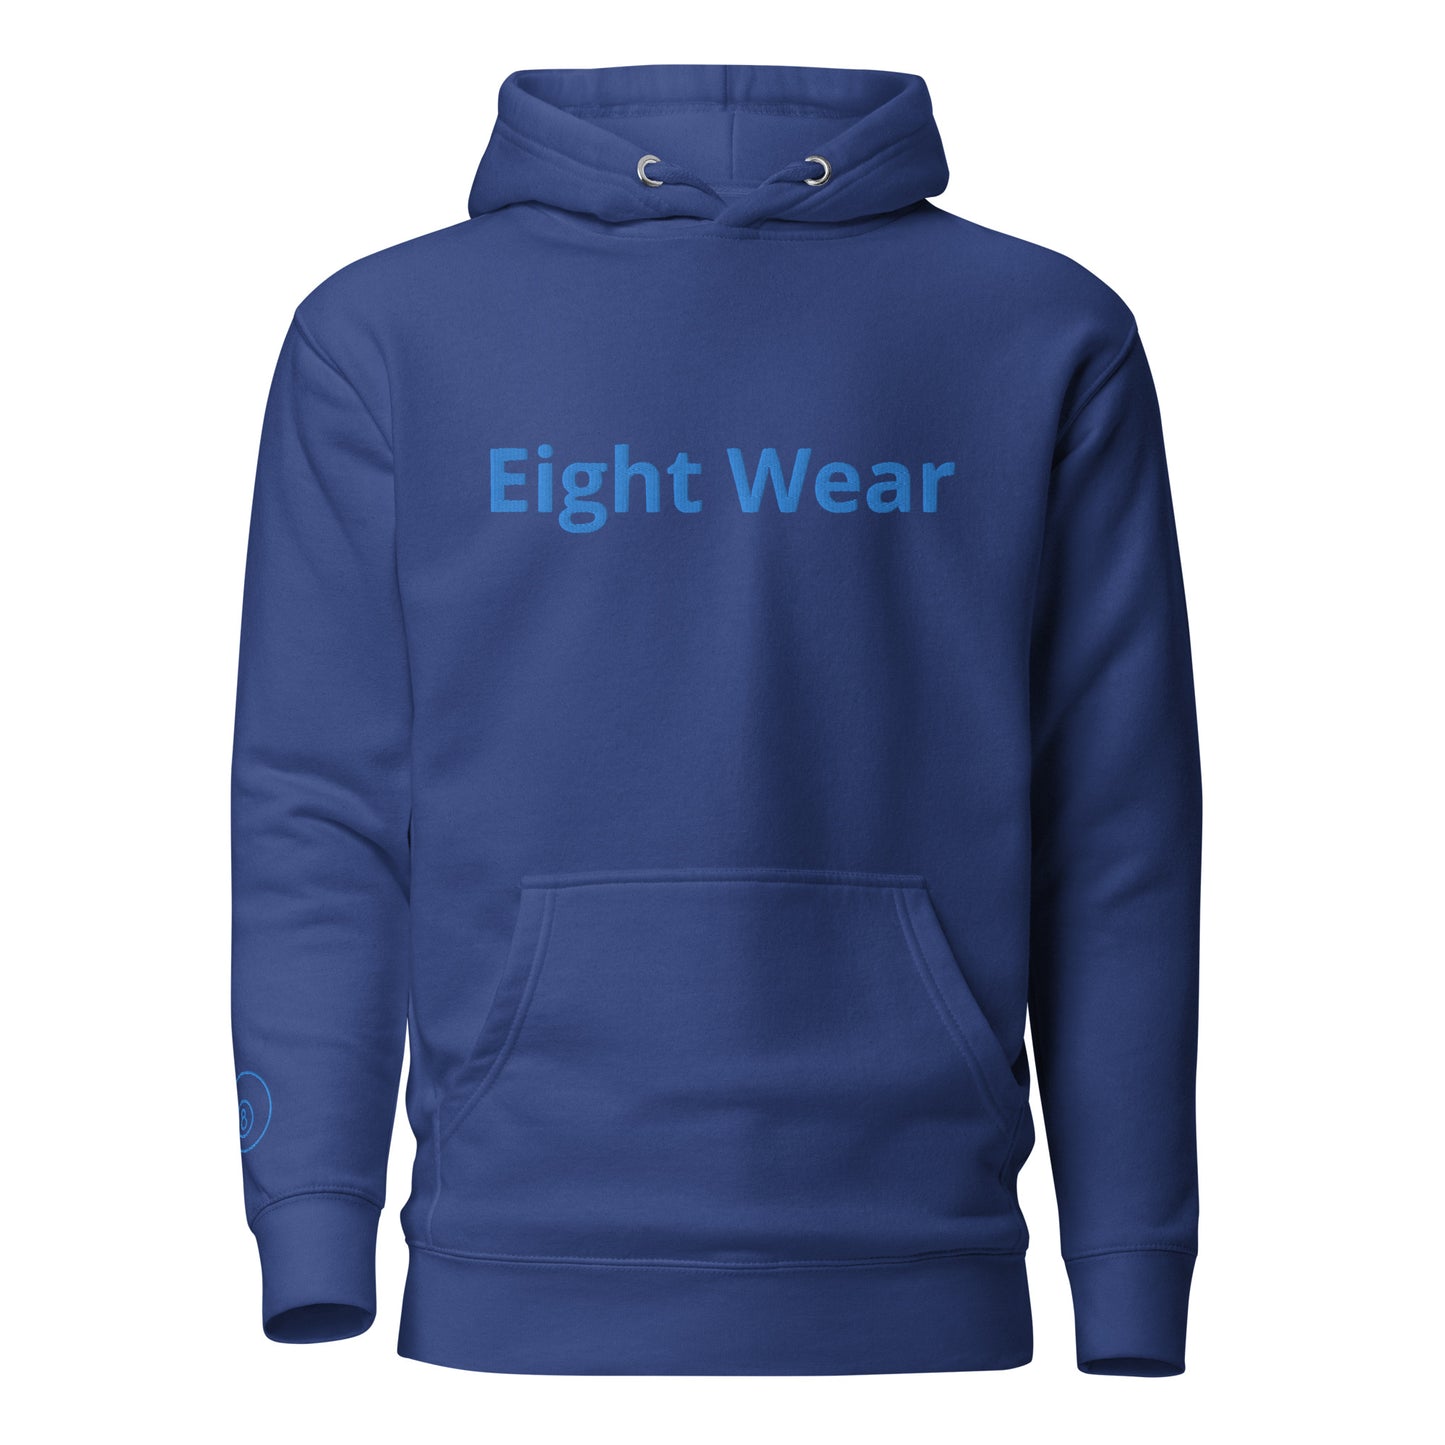 Eight Wear Embroidered Unisex Hoodie - Royal